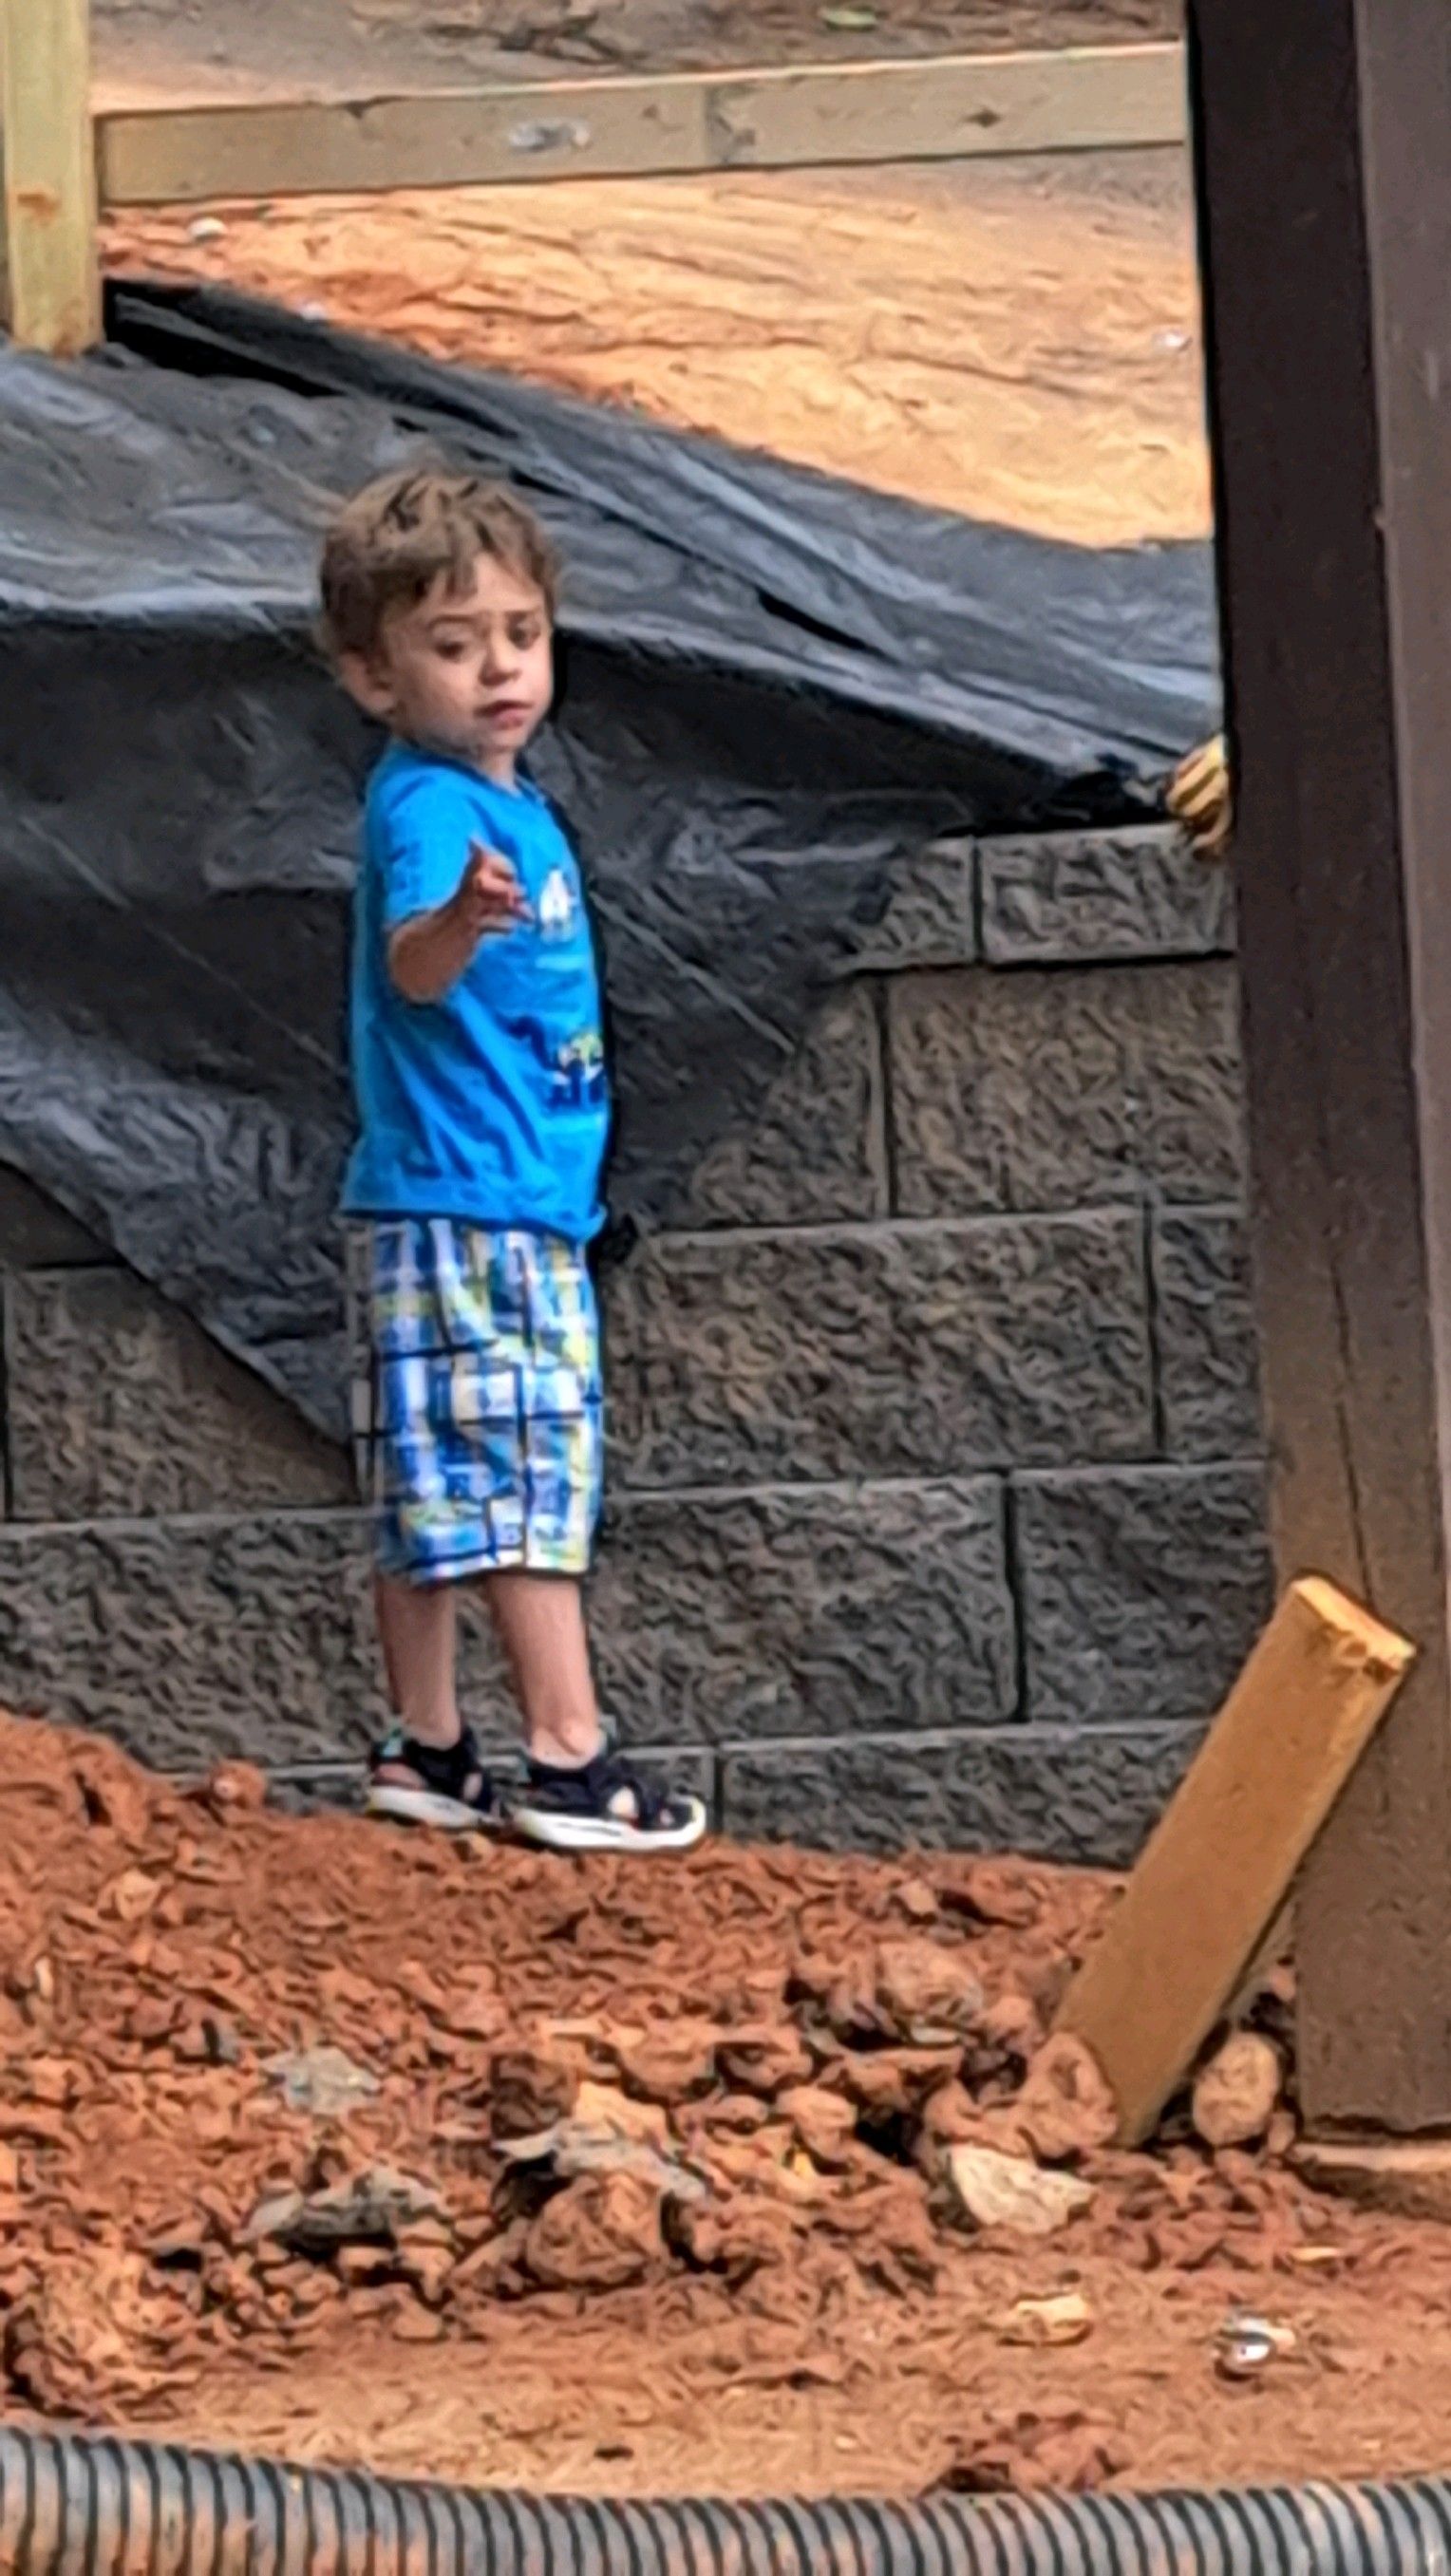 A young boy is standing in the dirt next to a brick wall.